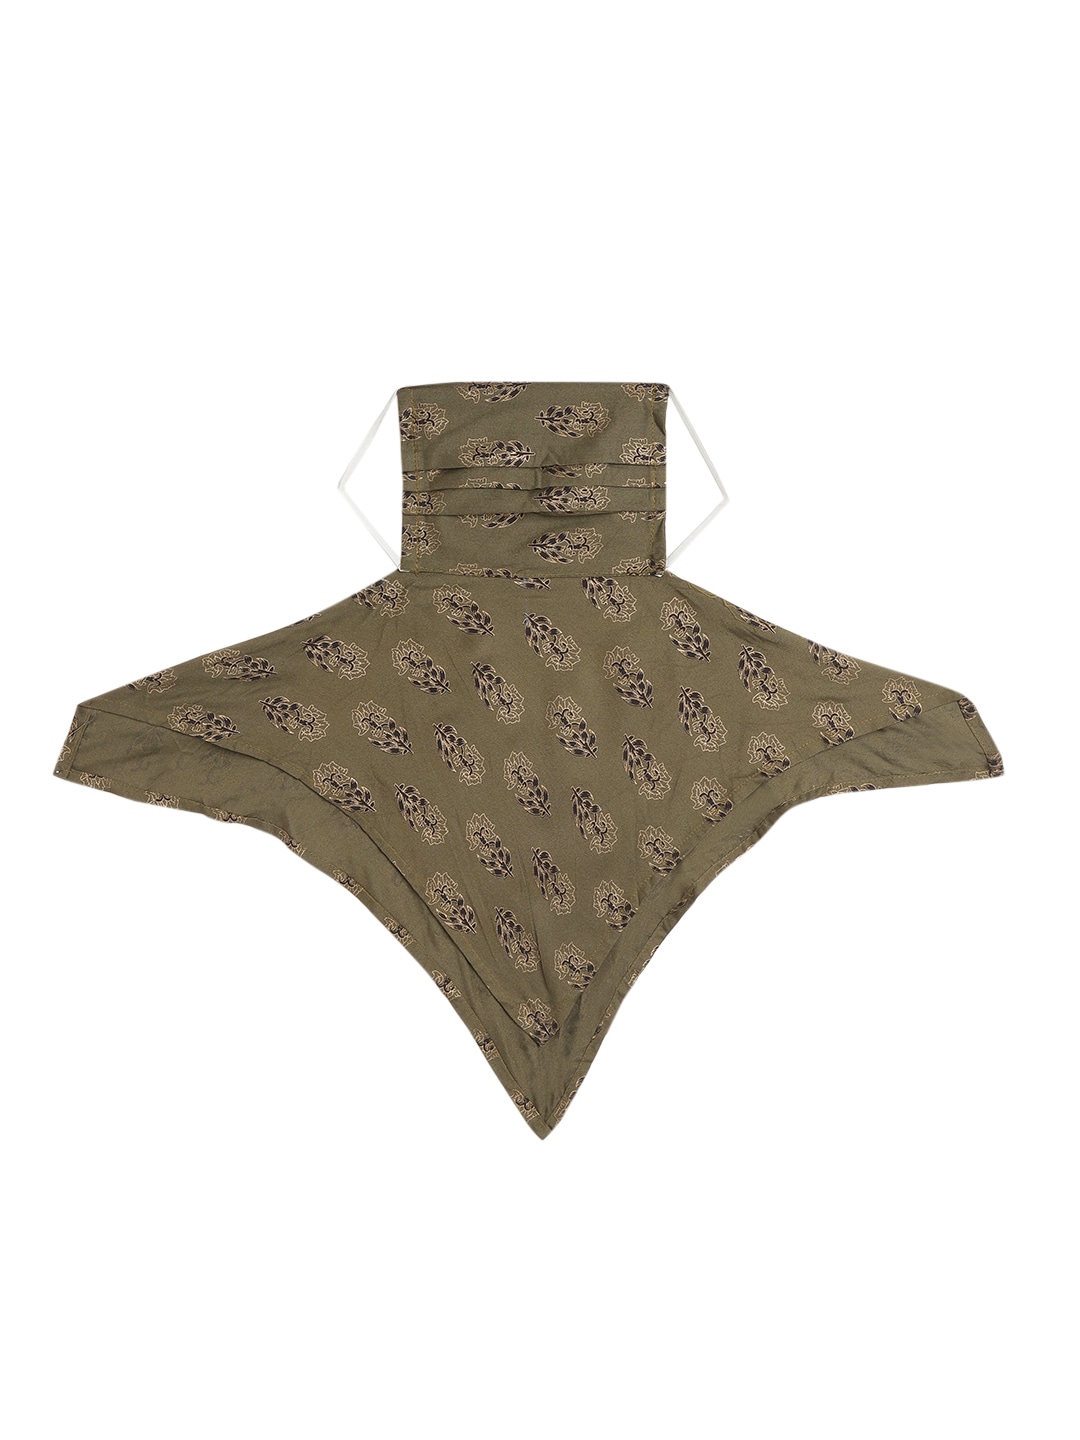 InWeave Women Olive Green & Black Floral Print 2-Ply Reusable Outdoor Cloth Scarf Mask Price in India